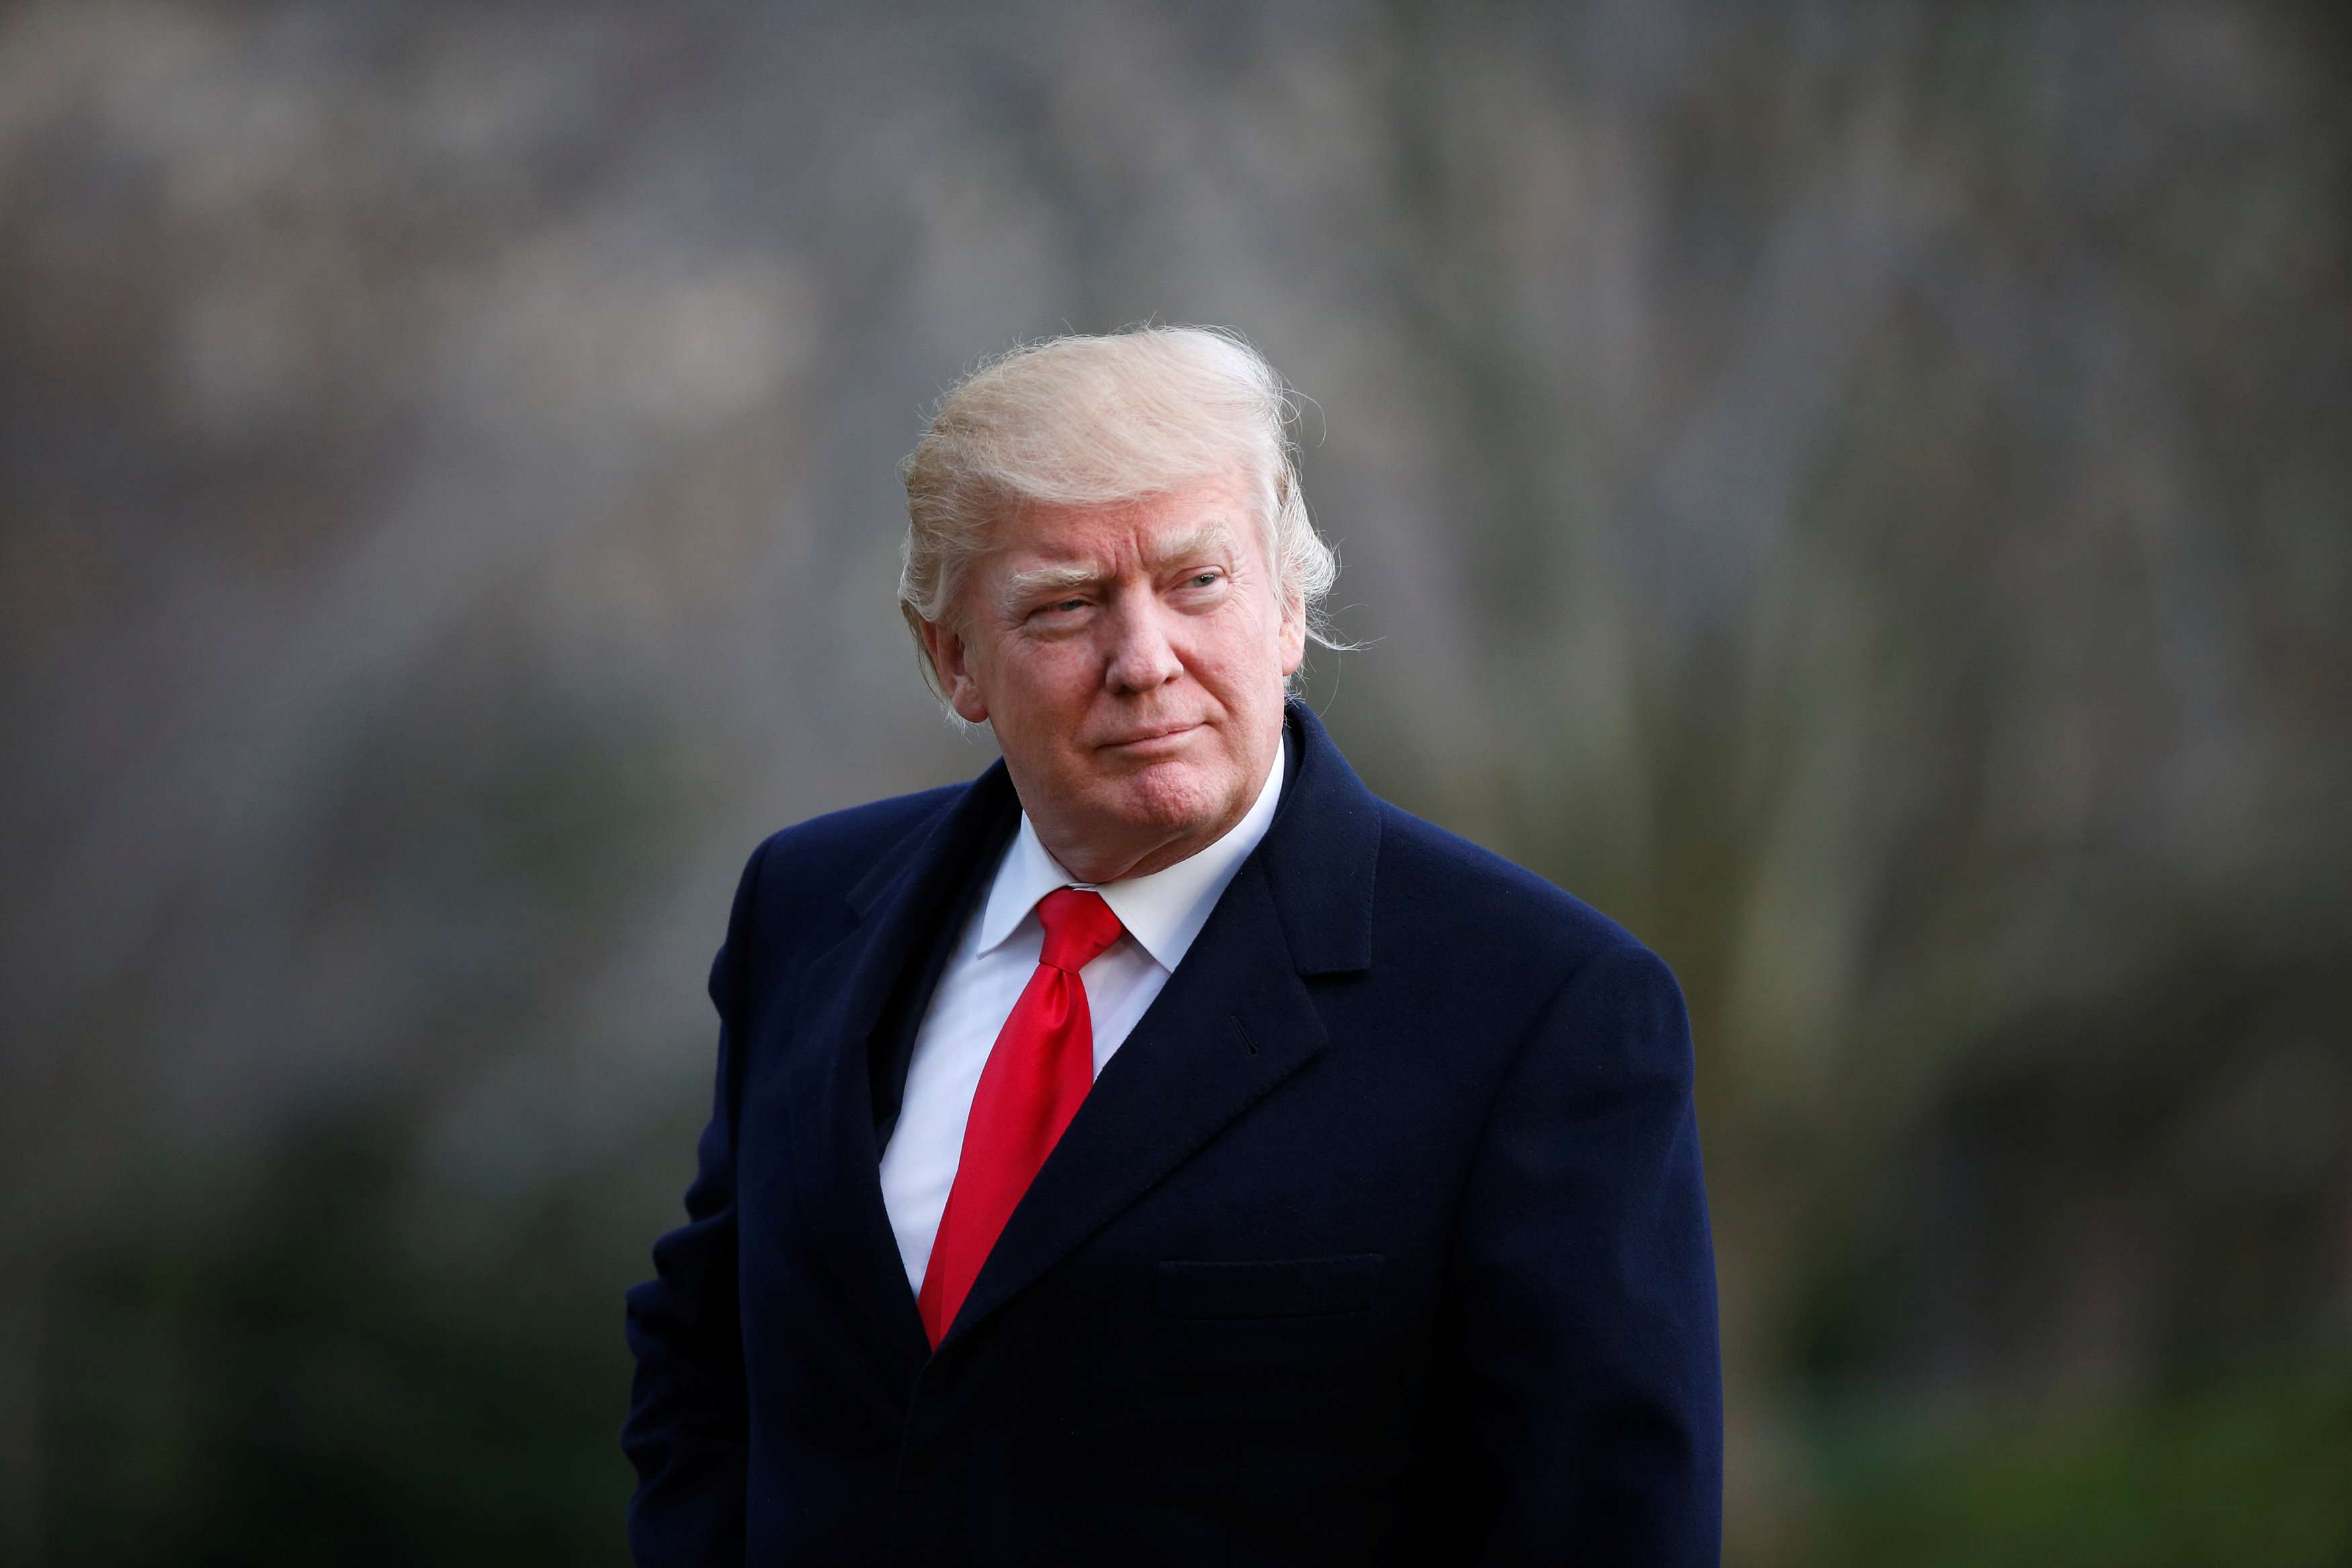 US President Donald Trump pictured at the White House in Washington earlier this month. Photo: Reuters